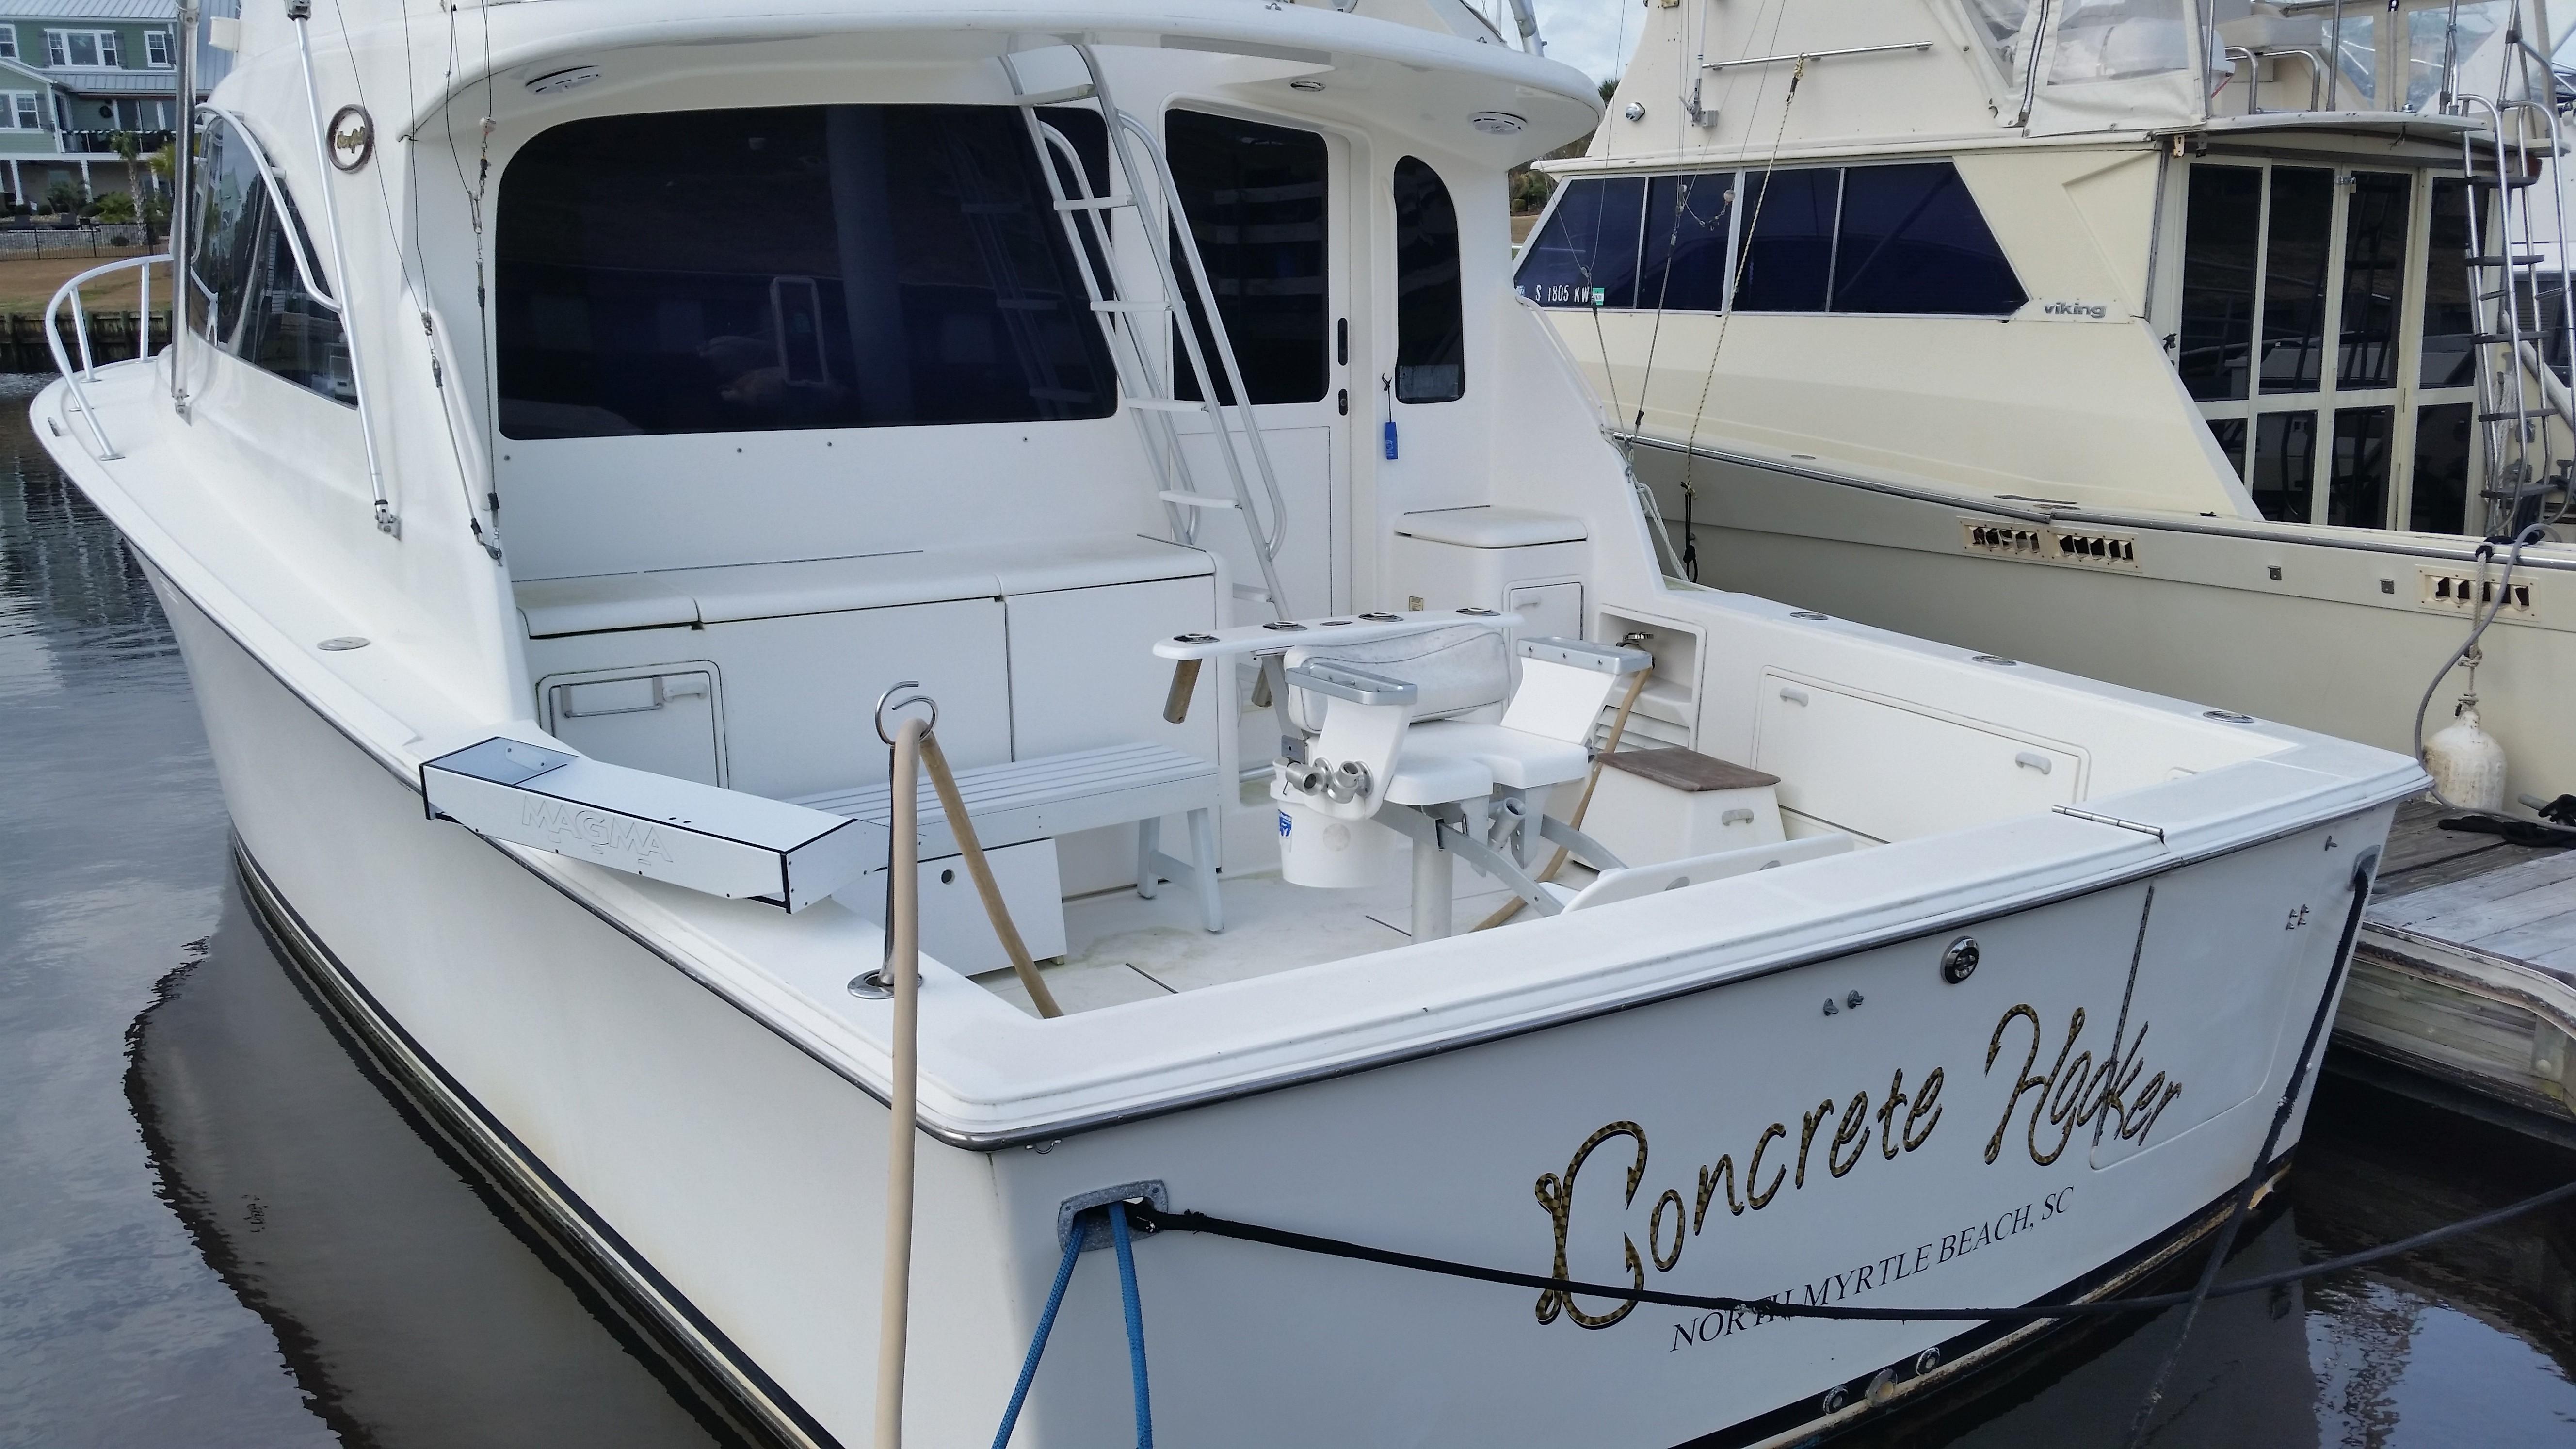 ocean yachts for sale new jersey